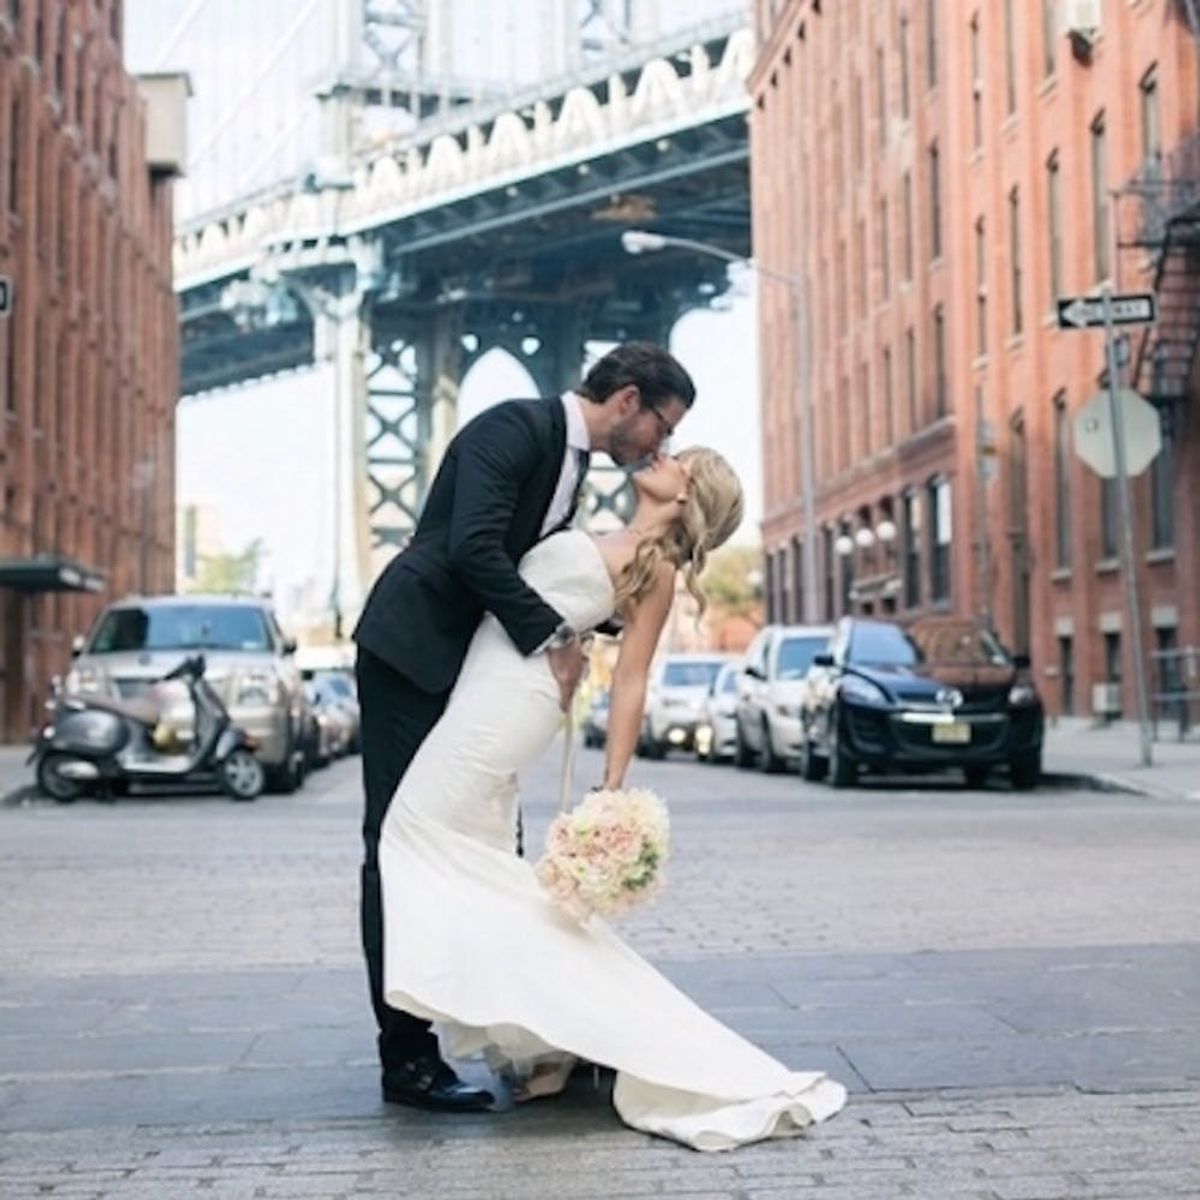 This Tiny New York Wedding Is BIG on Style